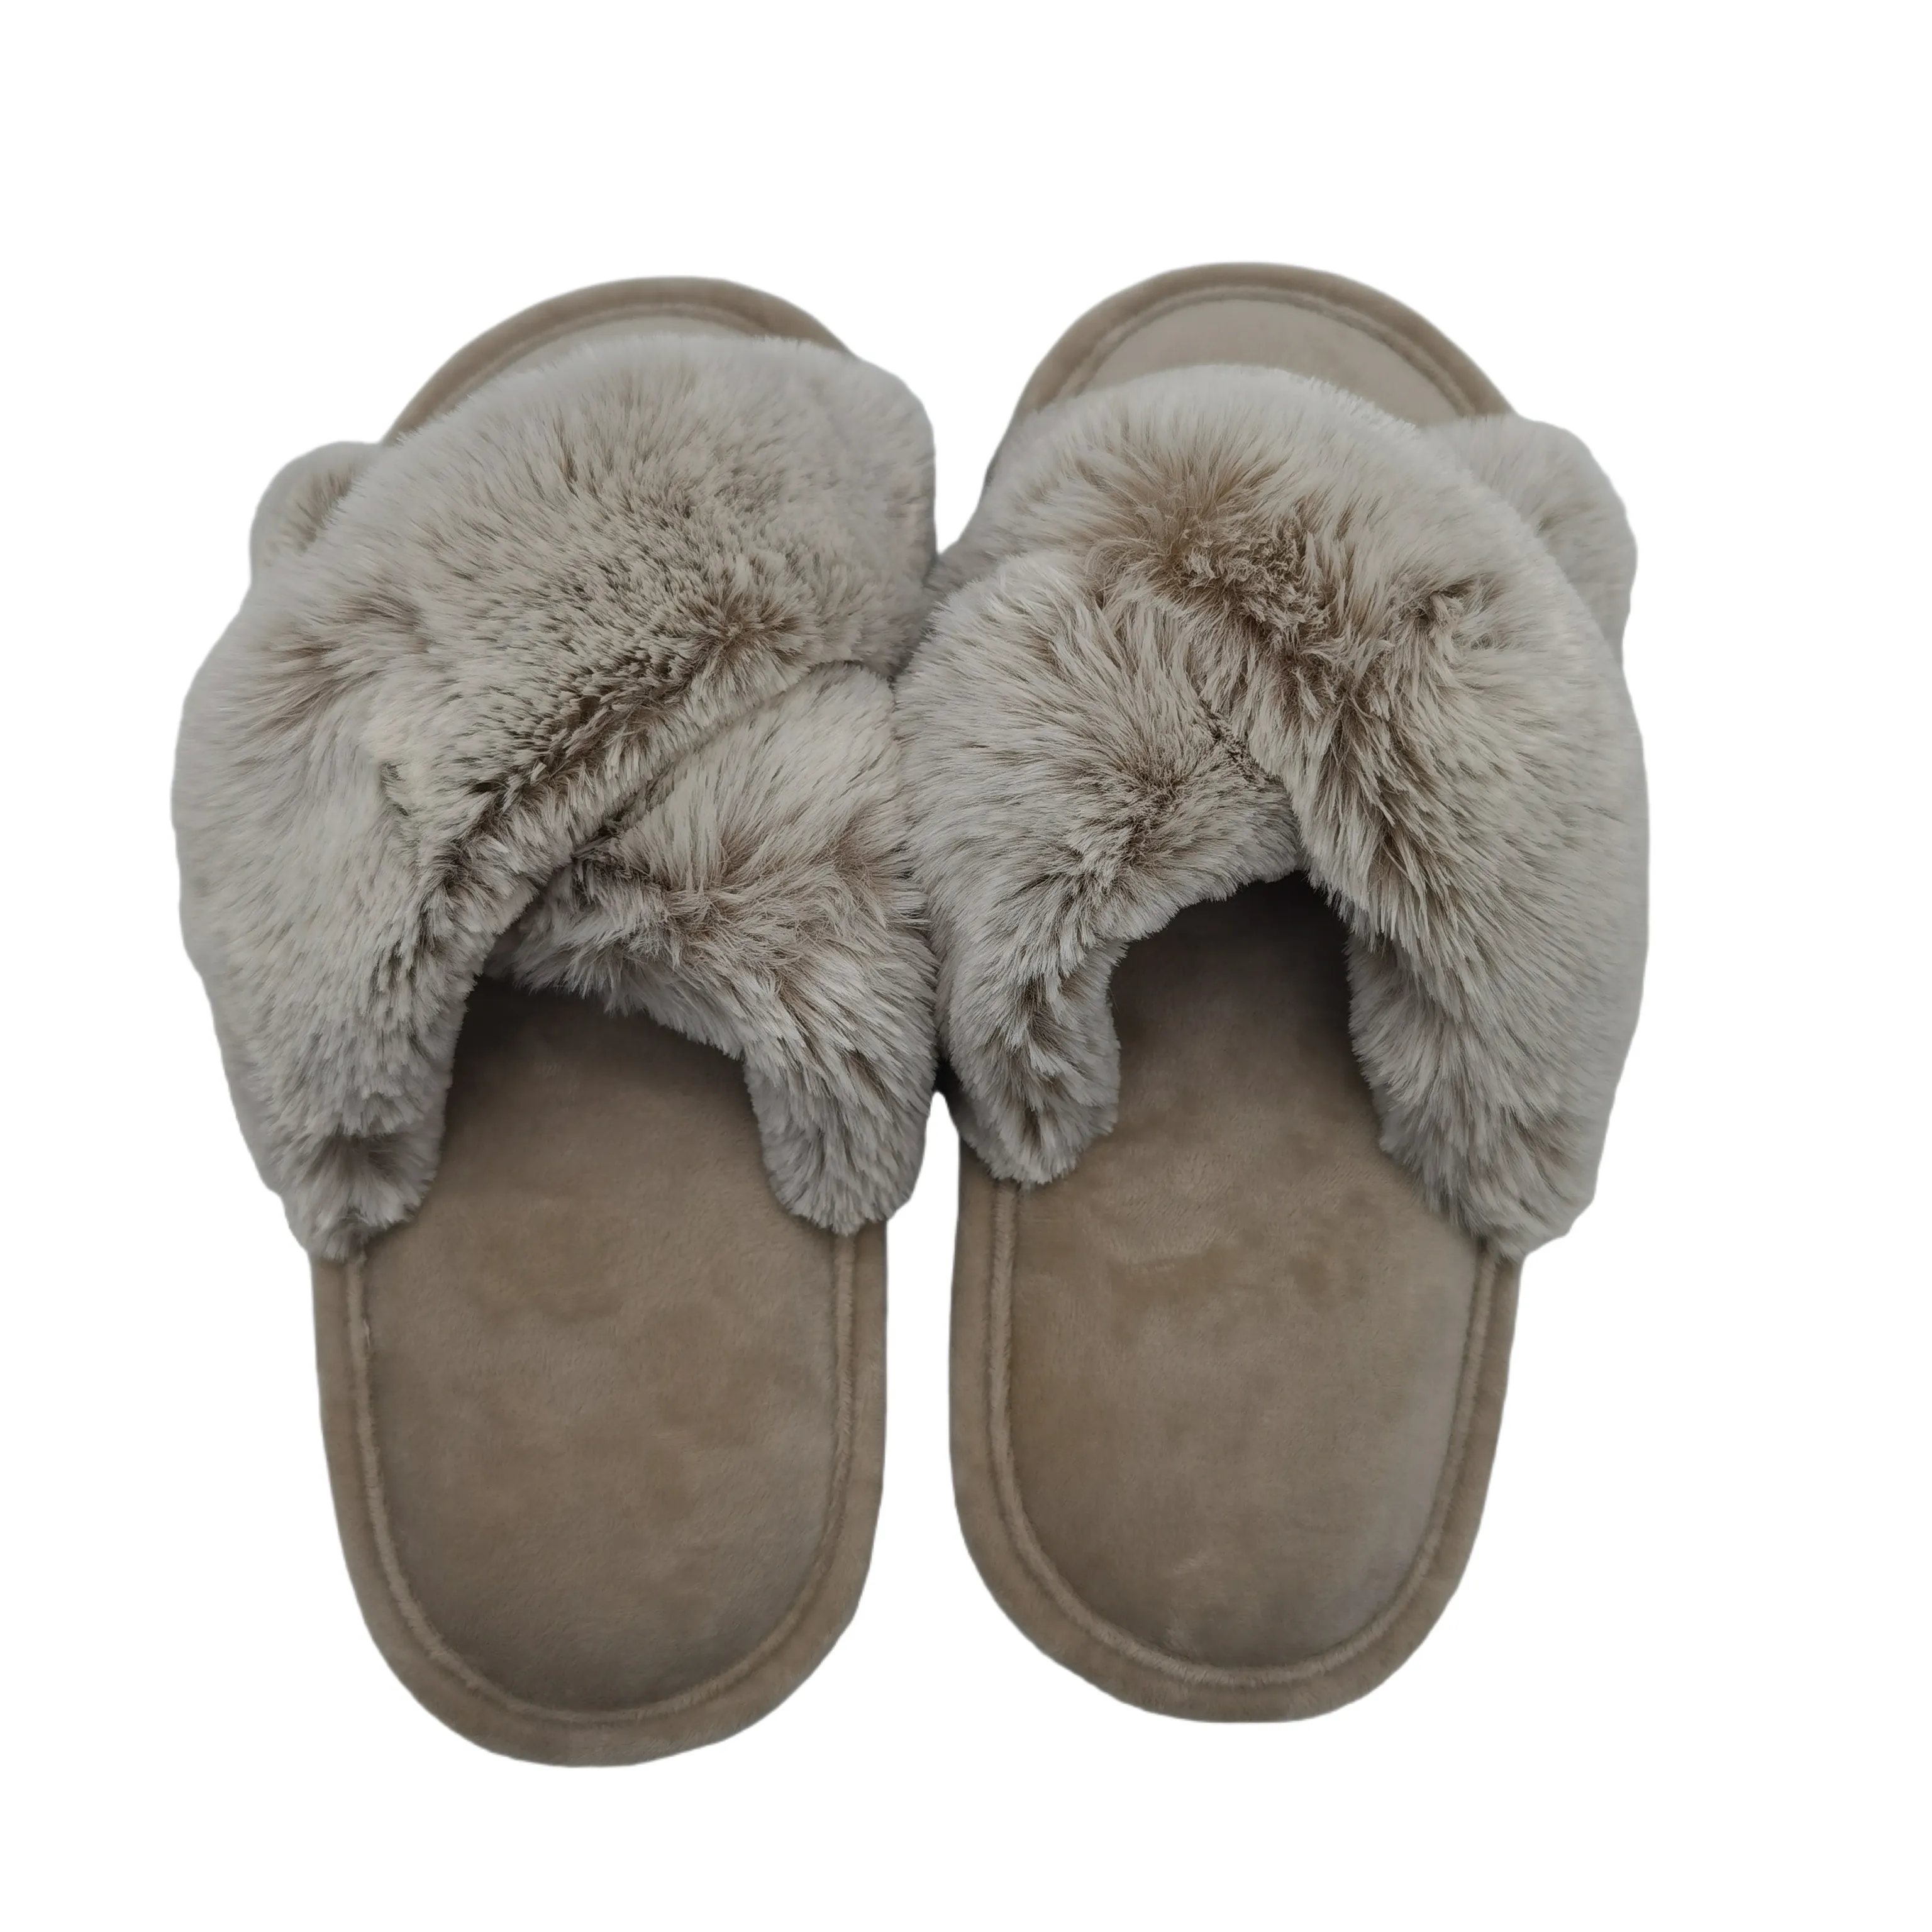 Customized Indoor Slippers Faux Fur Winter Plush Furry Cross Band Open Toe TPR Outsole Warm House Bedroom Slippers For Women